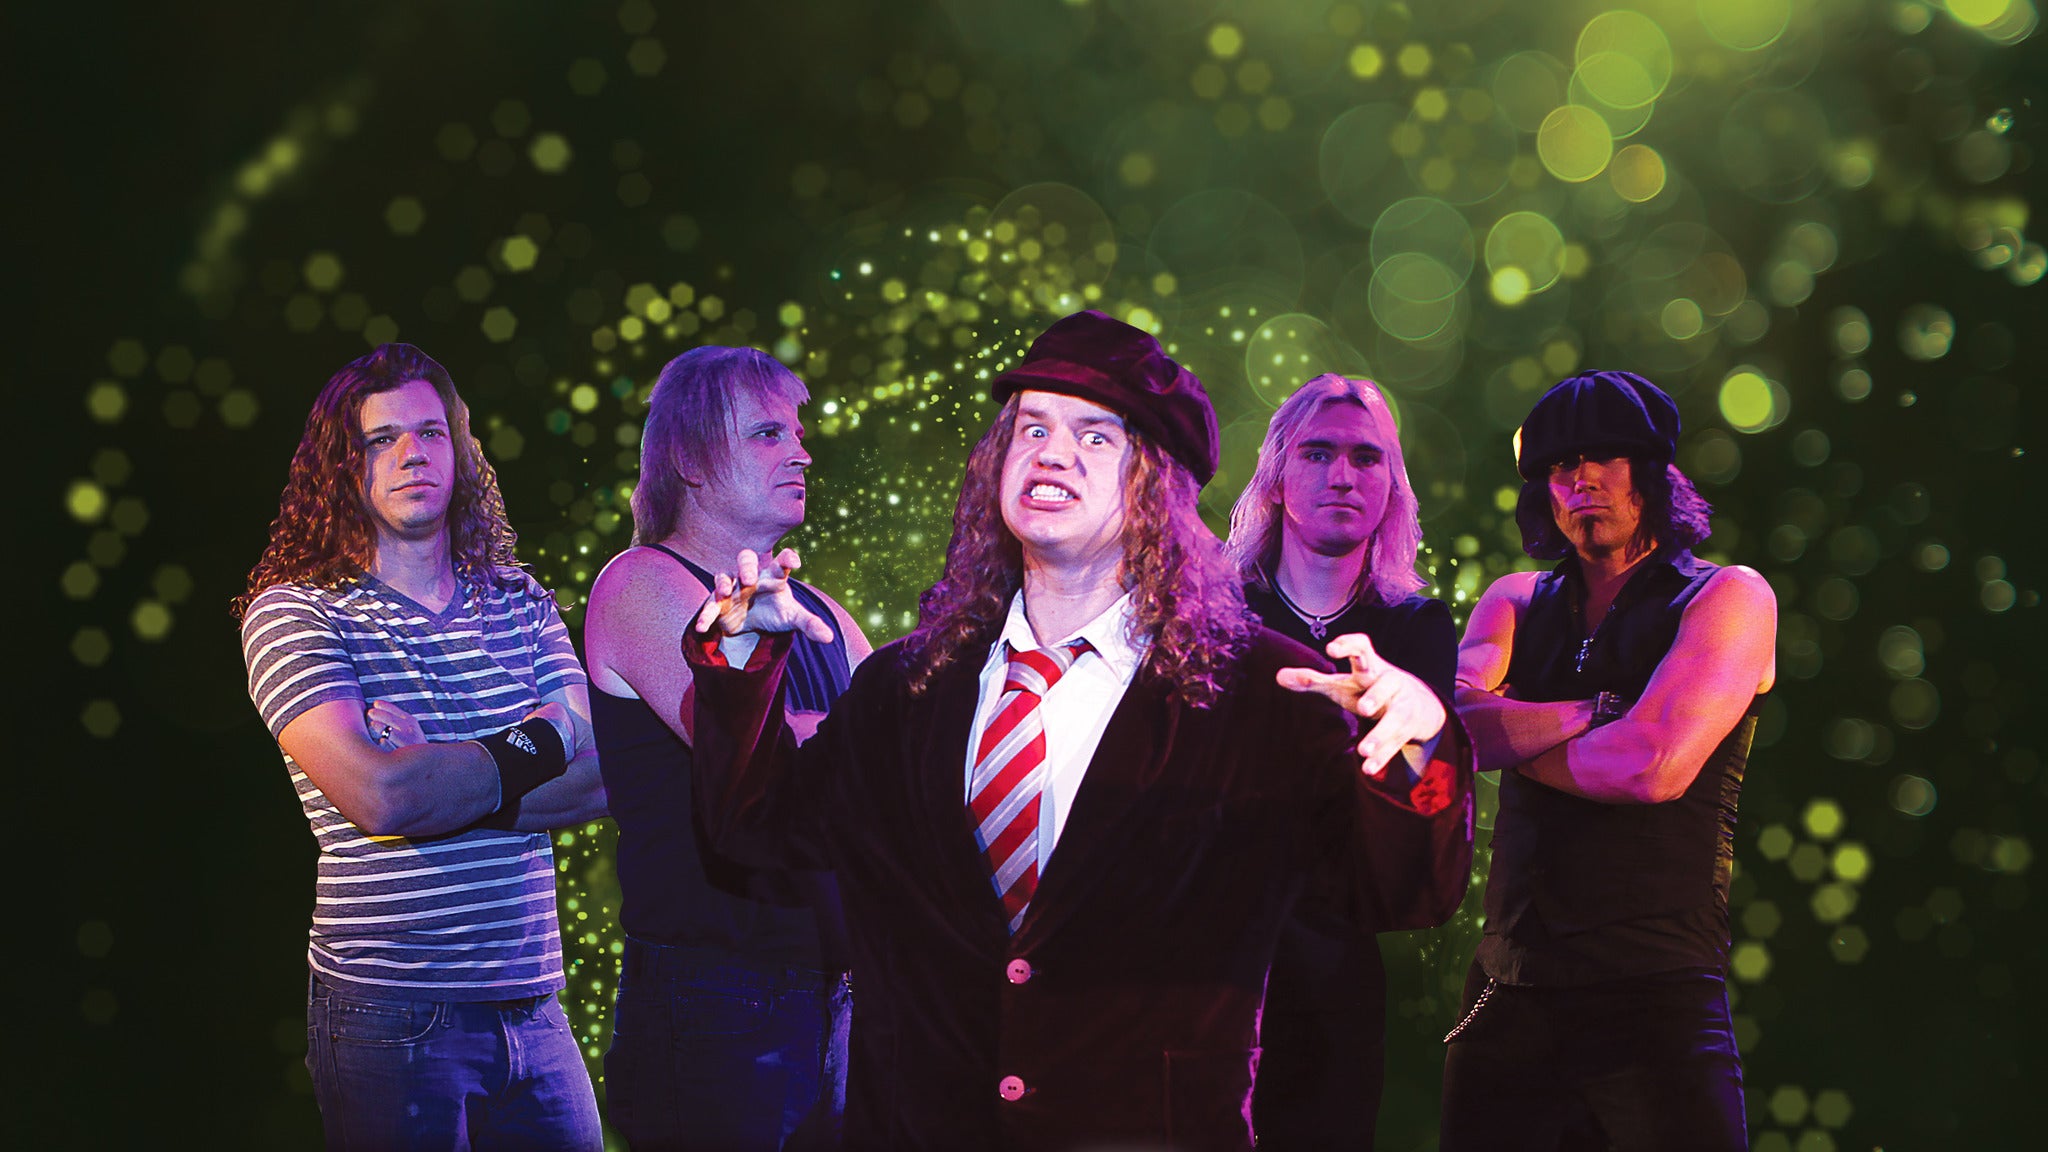 Thunderstruck - The Ultimate AC/DC Tribute Band in Detroit promo photo for Citi® Cardmember Preferred presale offer code